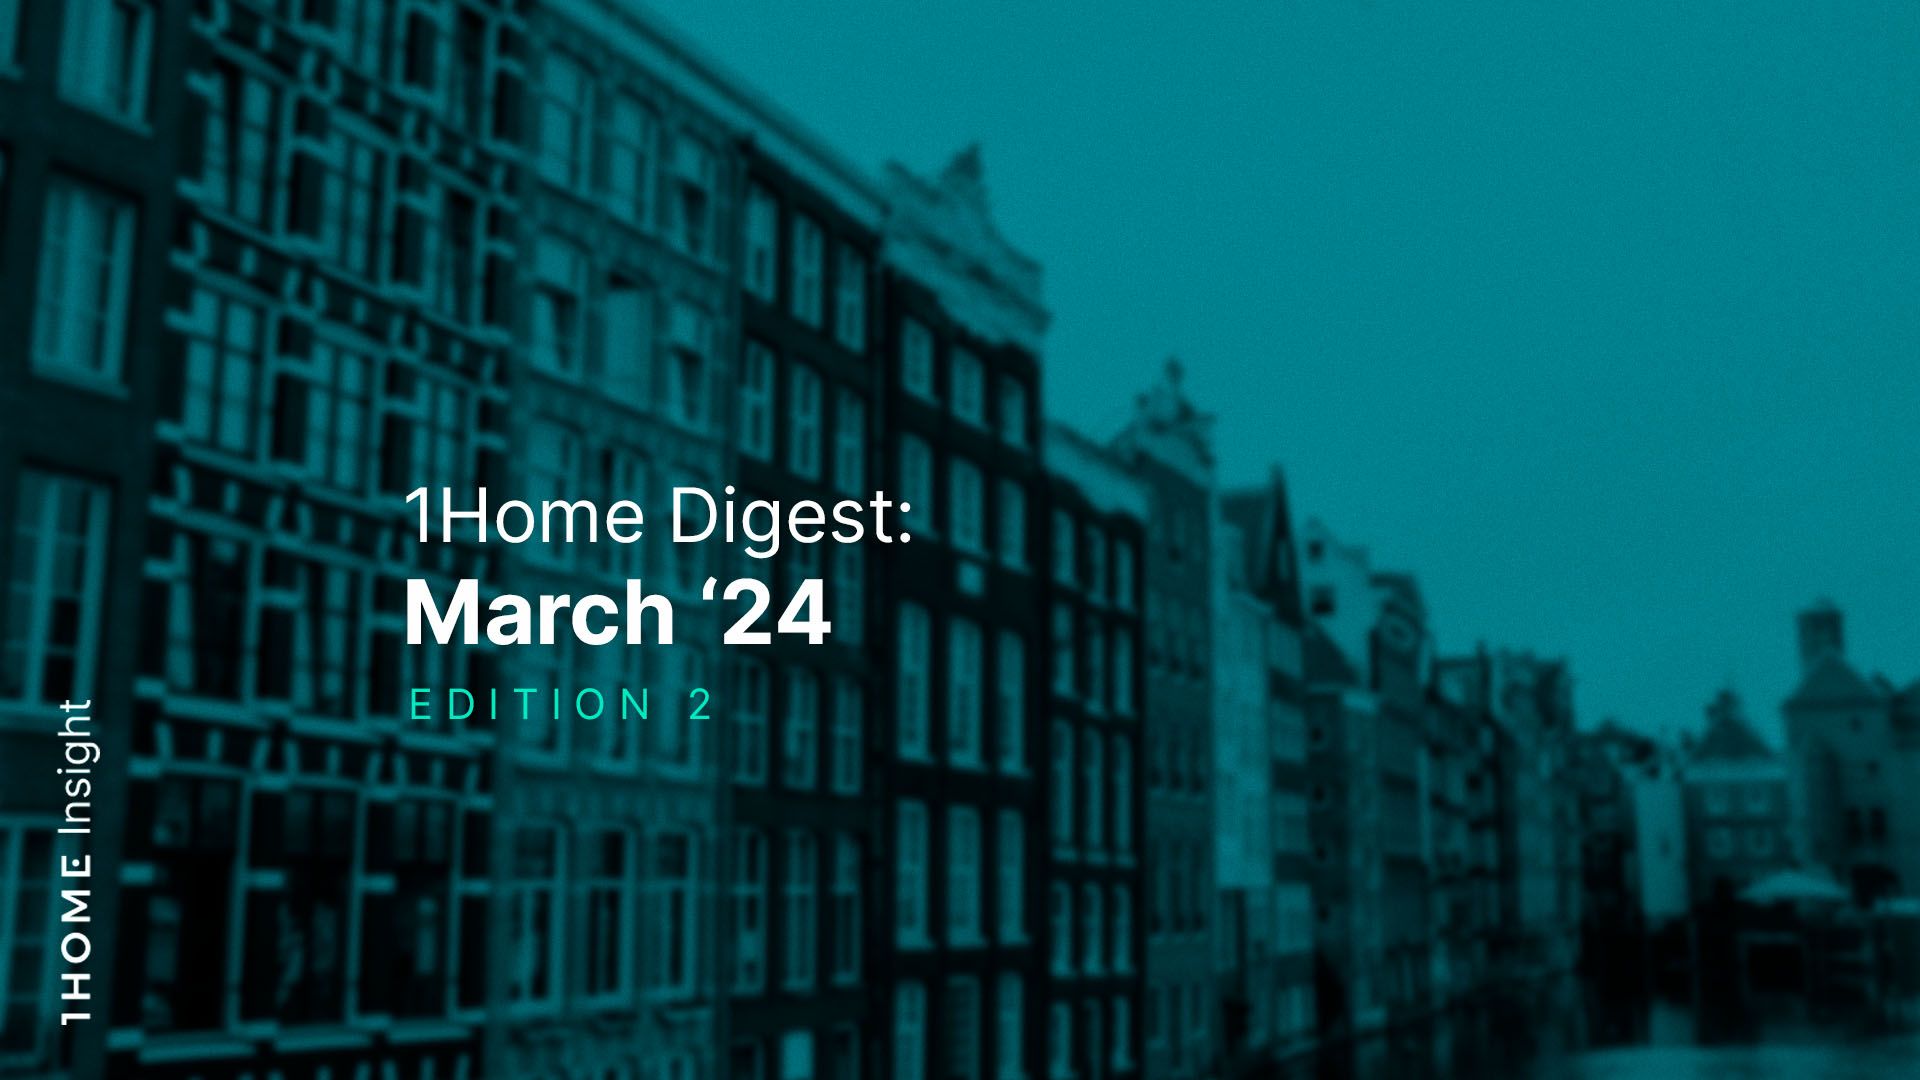 1Home Digest: March '24 Edition 2